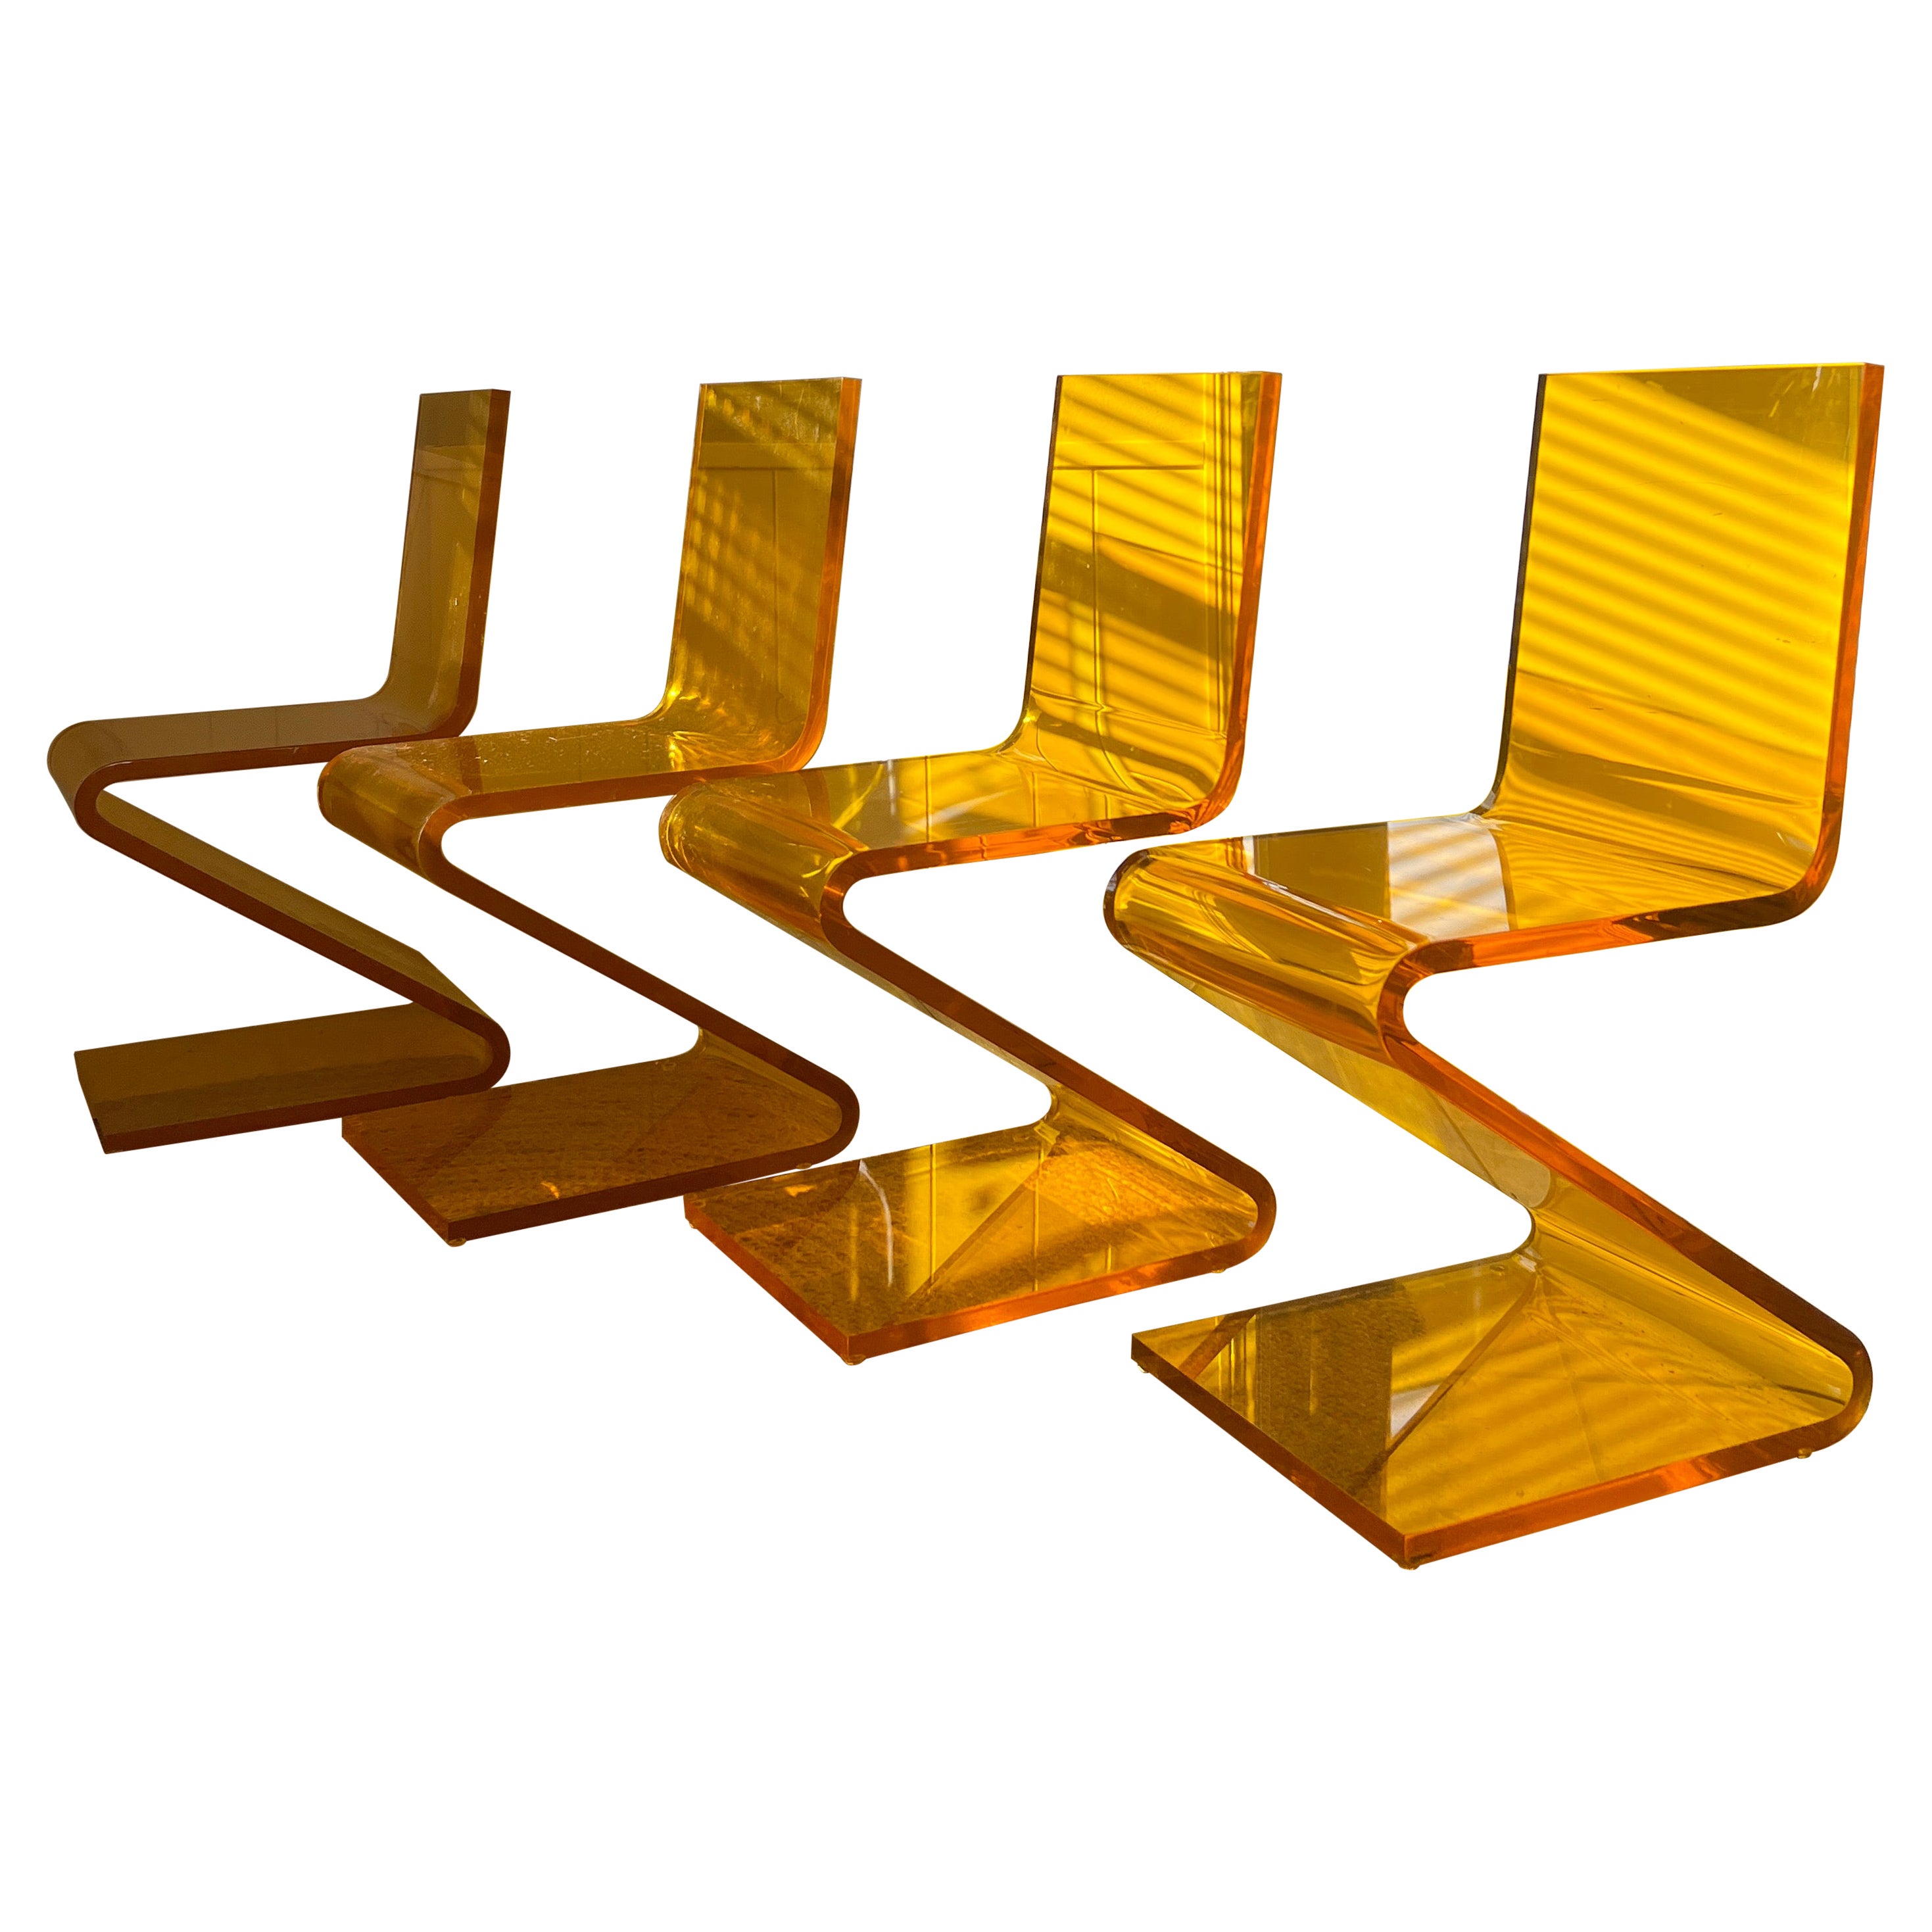 A set of four Z chairs by Haziza in a 1” thick lucite orange color